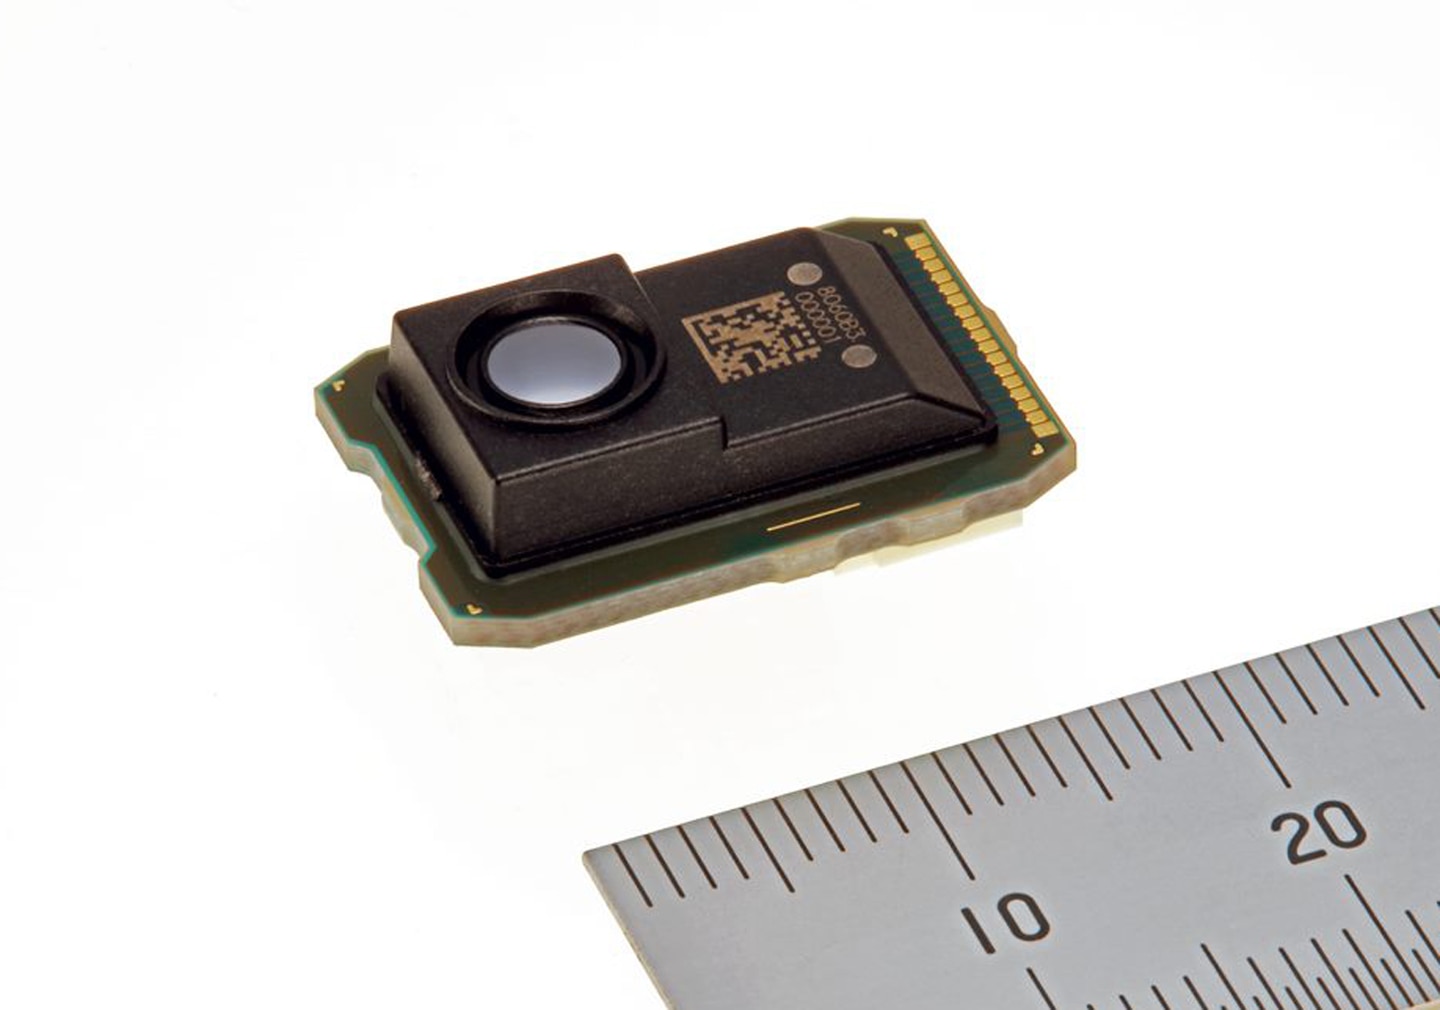 Thermal-diode infrared sensor (MelDIR) capable of measurements up to 200 degrees